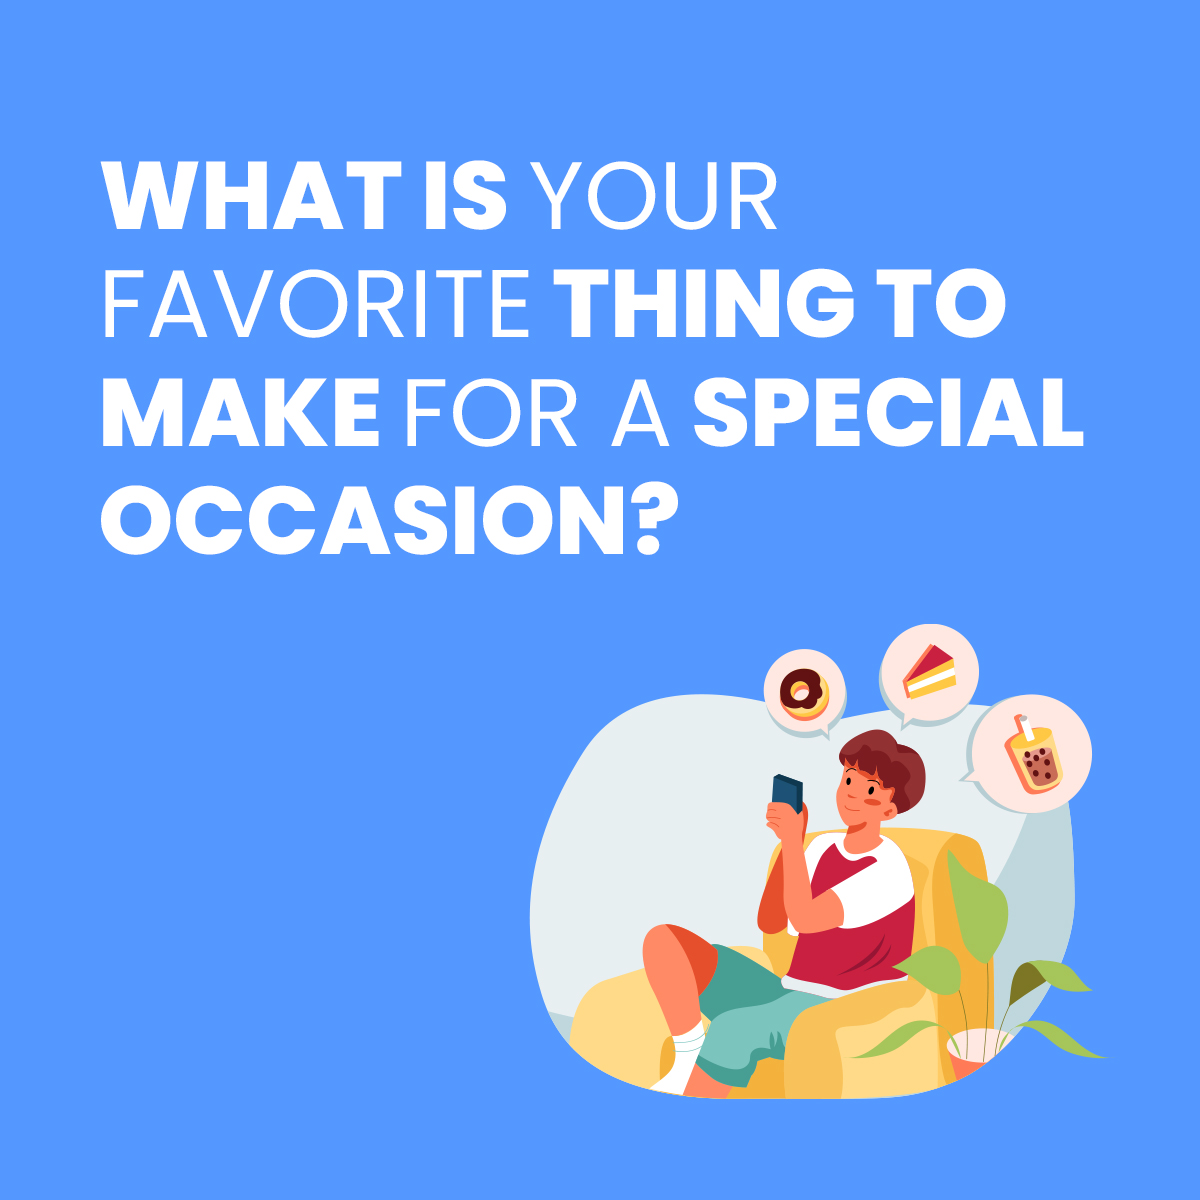 What is your favorite thing to make for a special occasion? Let me know in the comments.

#favoritething #love #travel #photography #beautiful